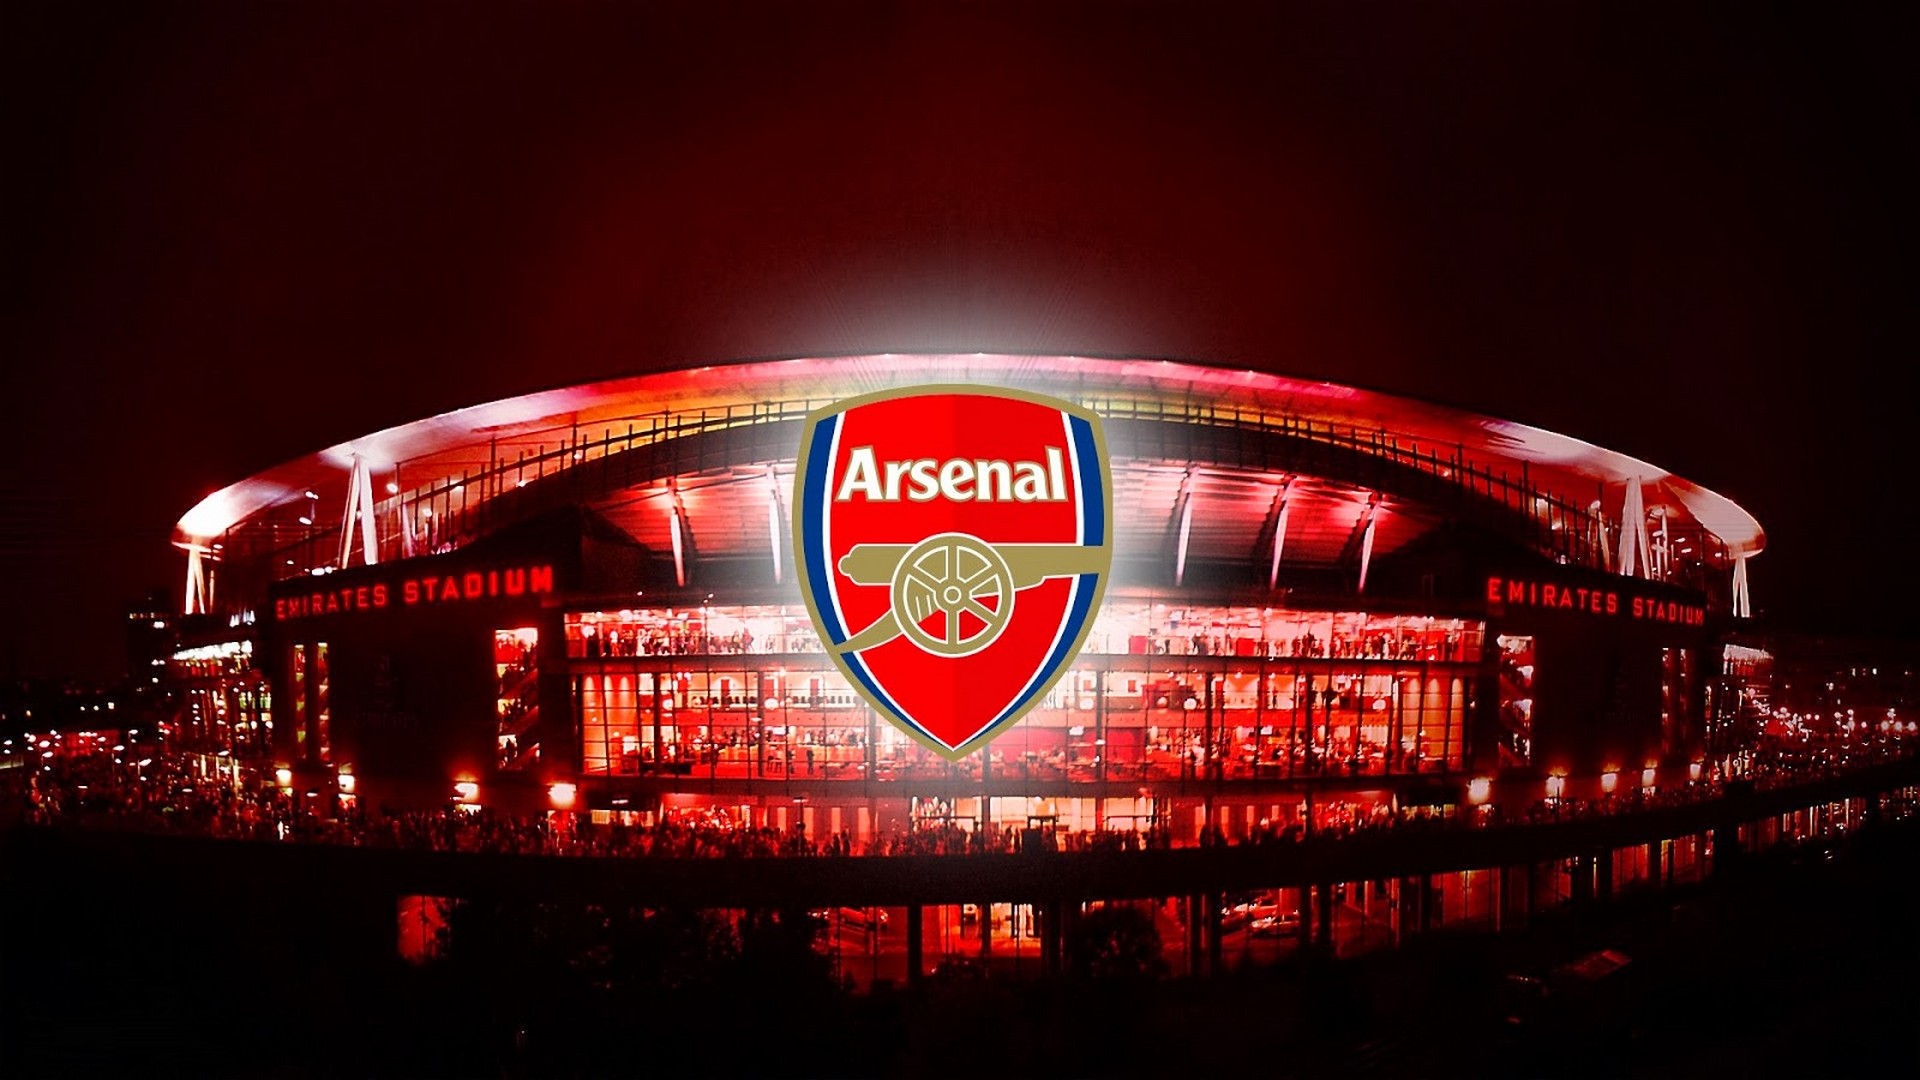 Arsenal Football Club Wallpaper For Mac Backgrounds With high-resolution 1920X1080 pixel. You can use this wallpaper for your Desktop Computers, Mac Screensavers, Windows Backgrounds, iPhone Wallpapers, Tablet or Android Lock screen and another Mobile device